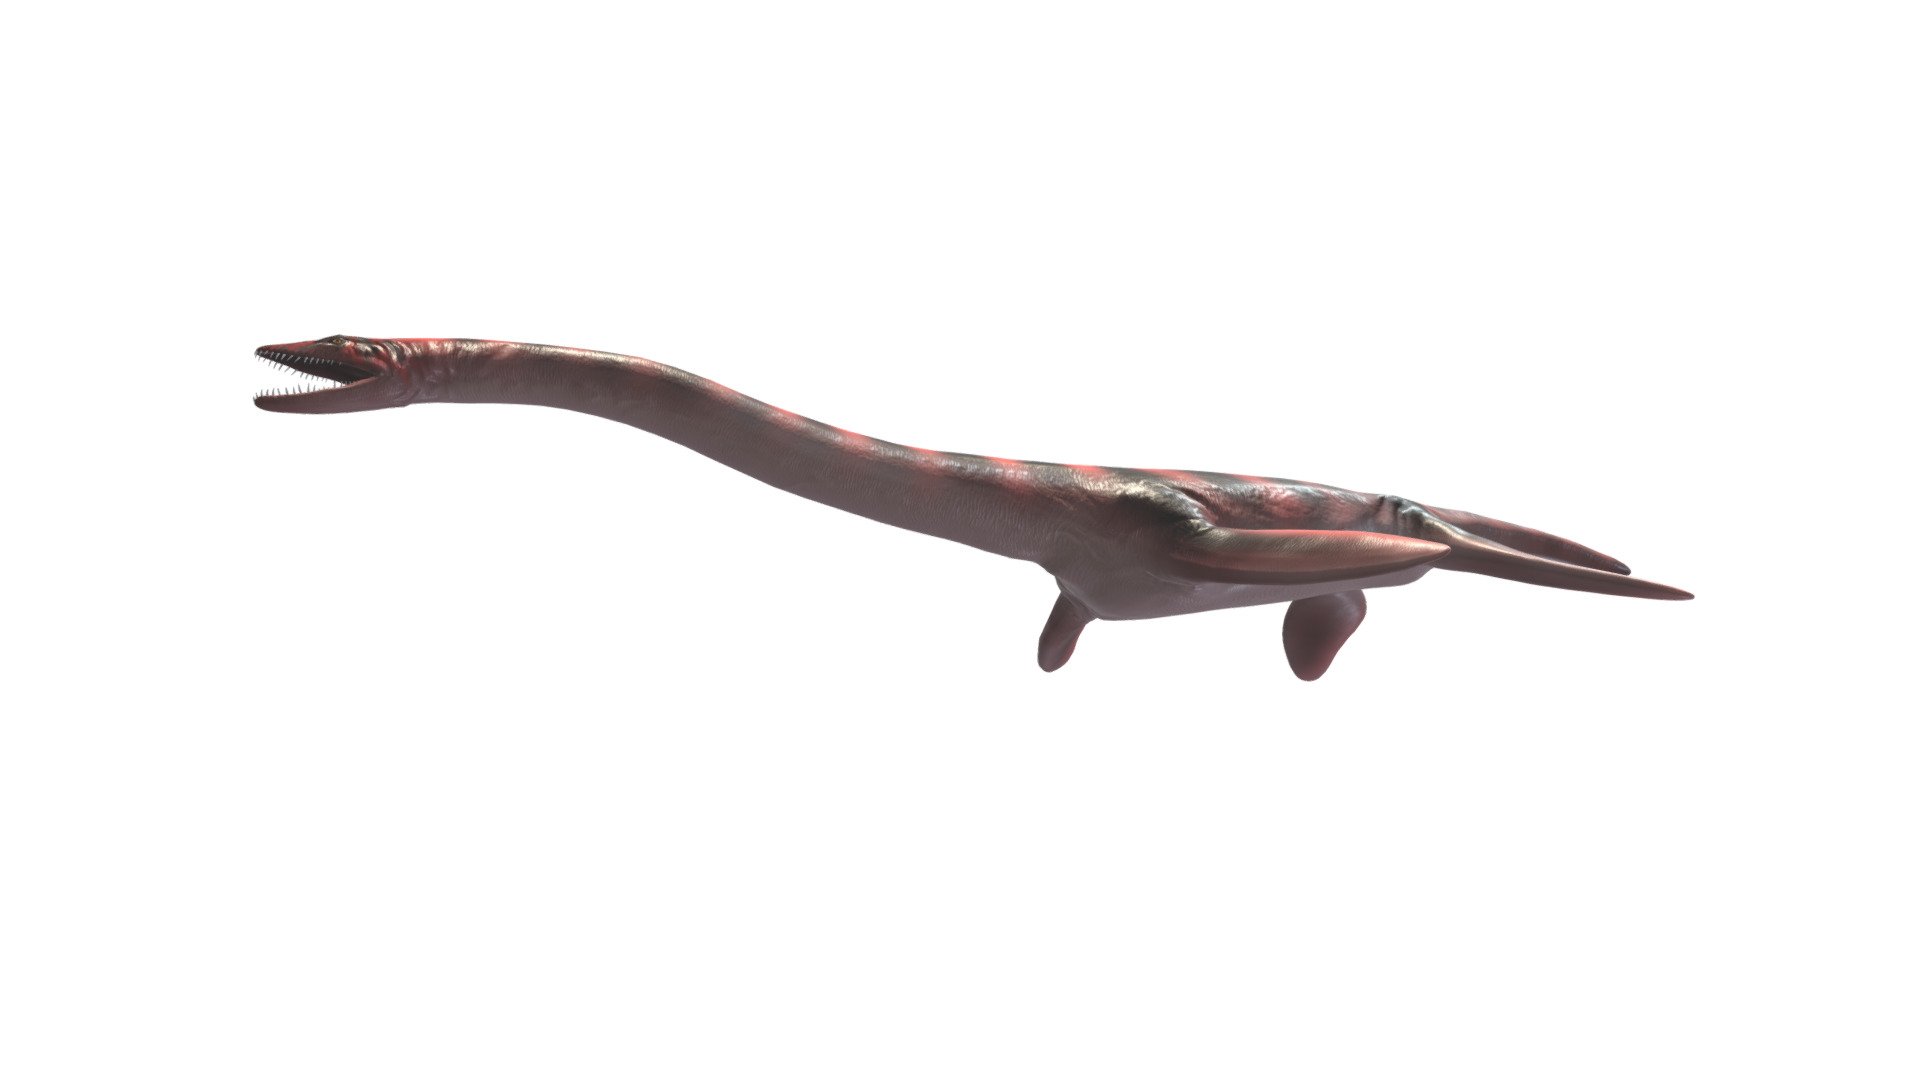 Information:

A fine model of the Plesiosaurus dolichodeirus , made with ZBrush 2019.
It was used to make 2D paleoart renders, now available to include it in your environment 3d model